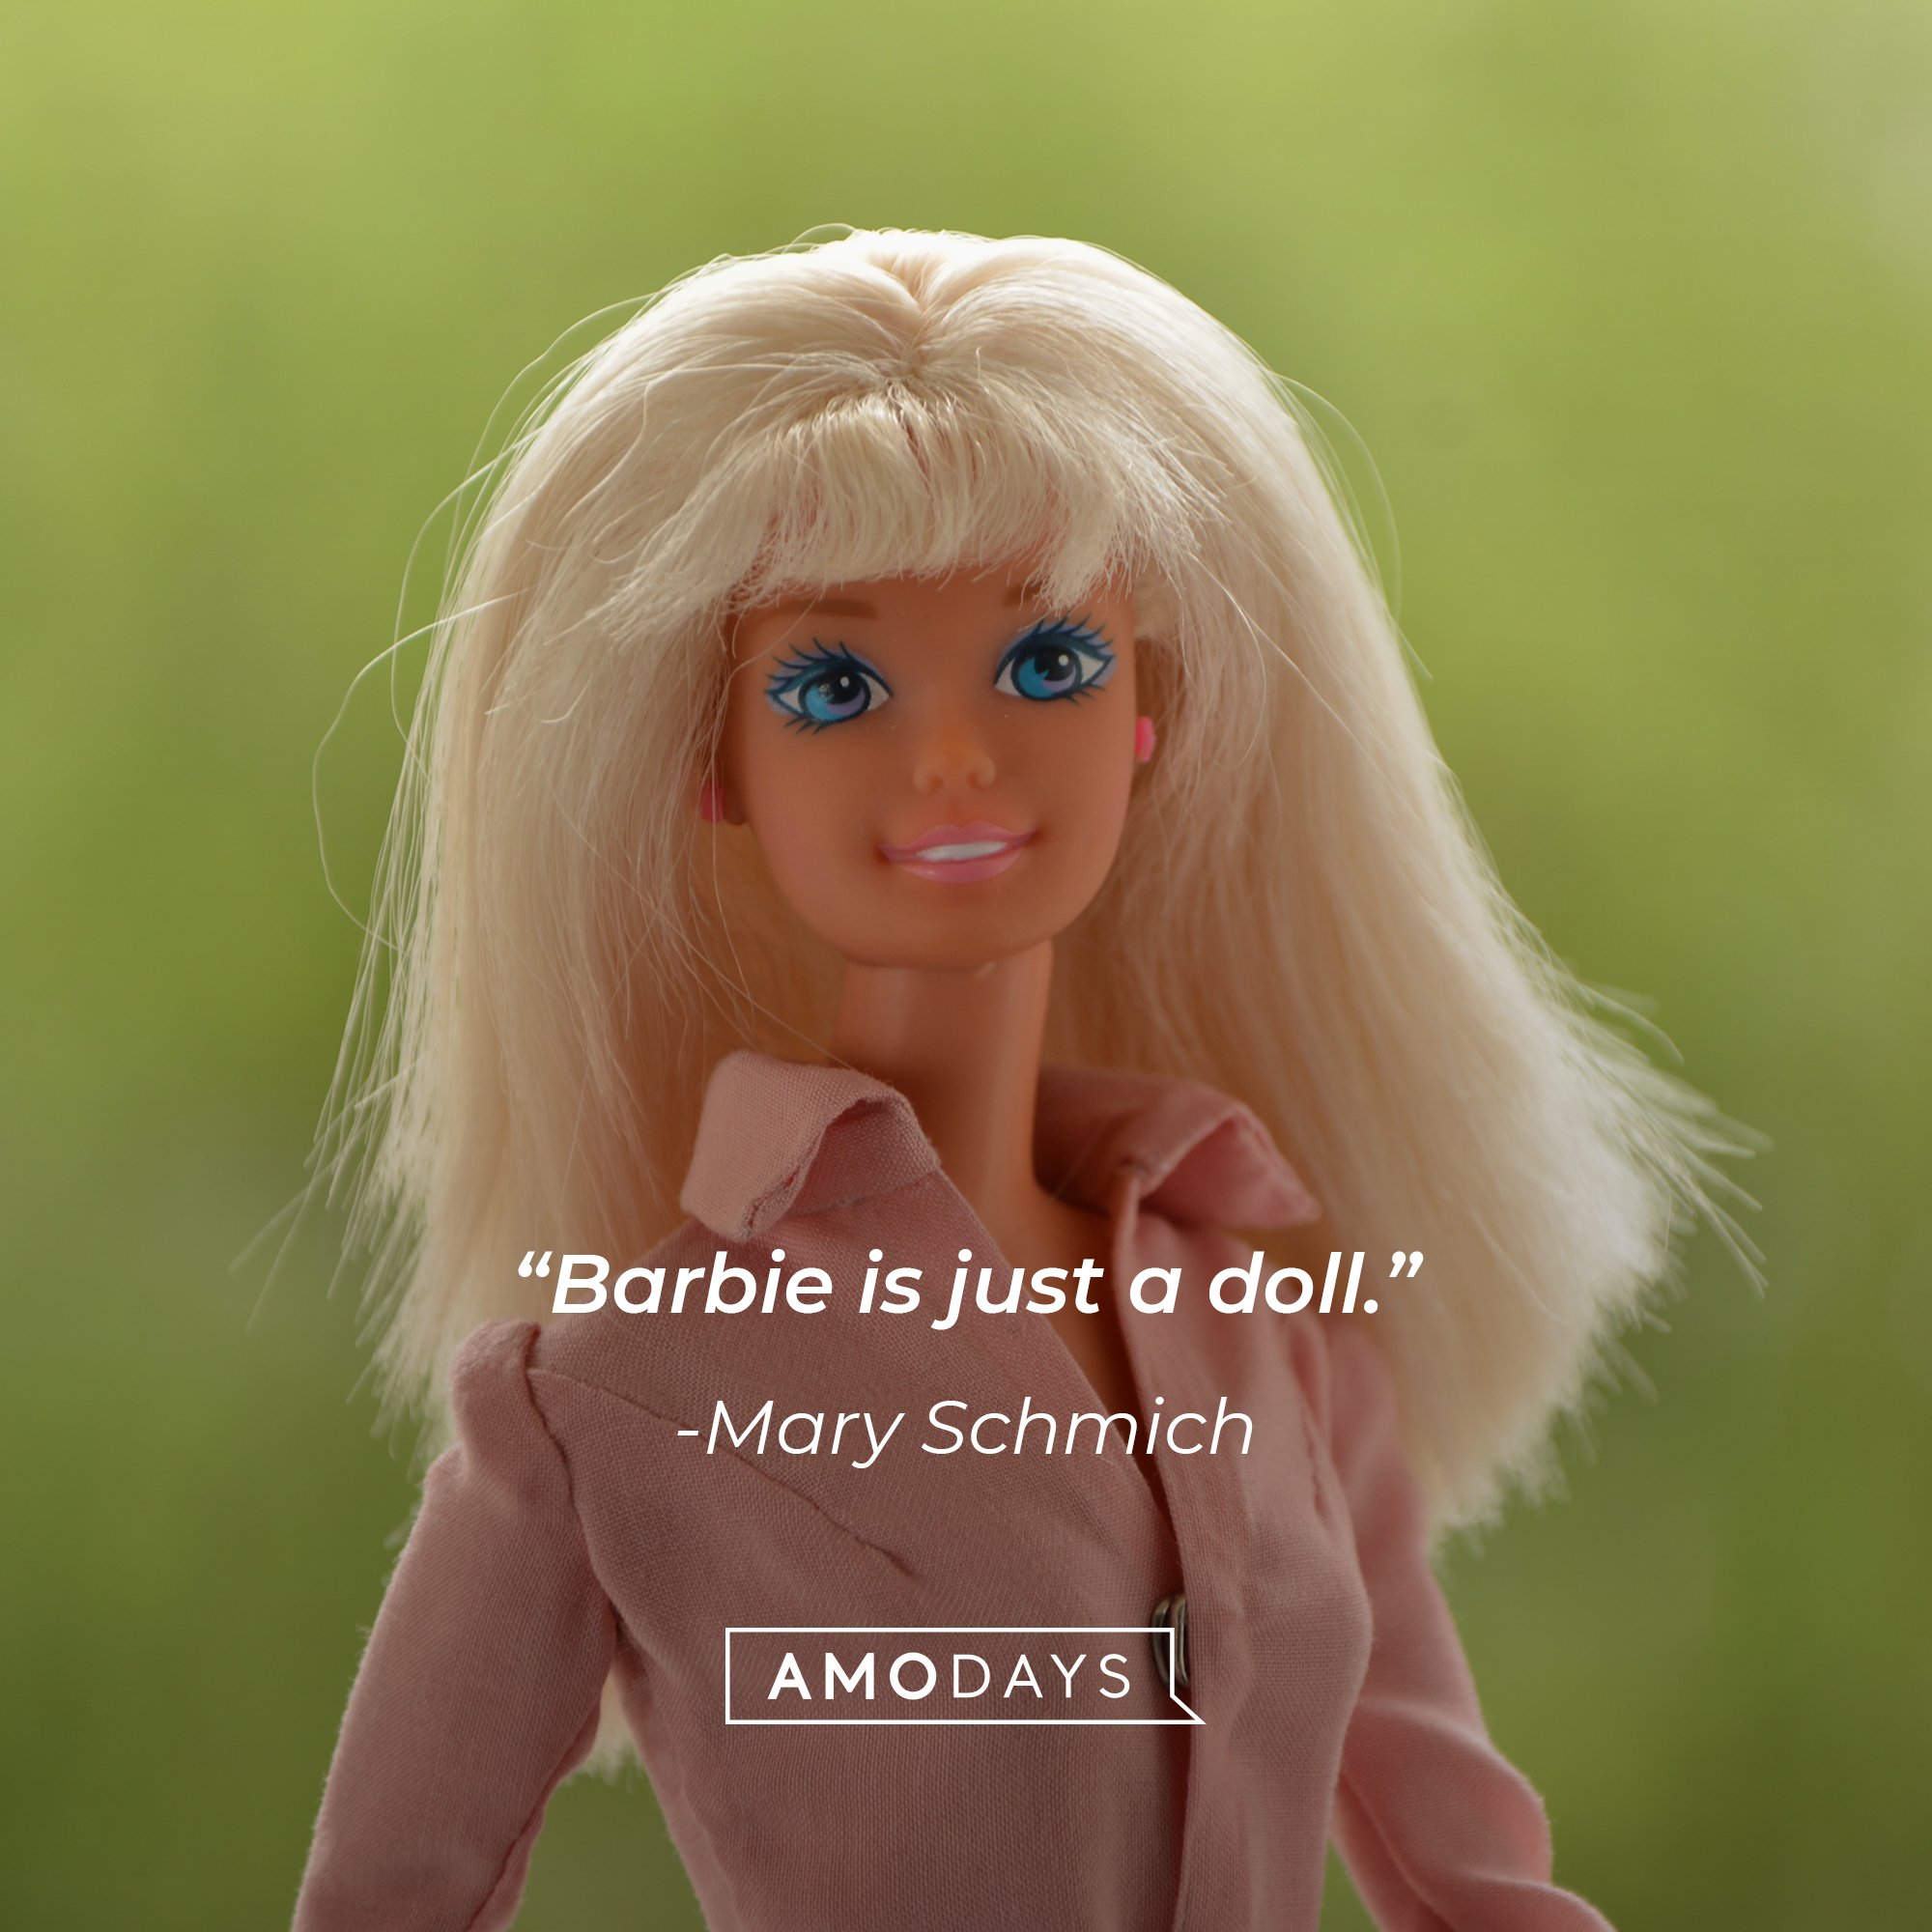 Mary Schmich's quote: "Barbie is just a doll." | Image: AmoDays